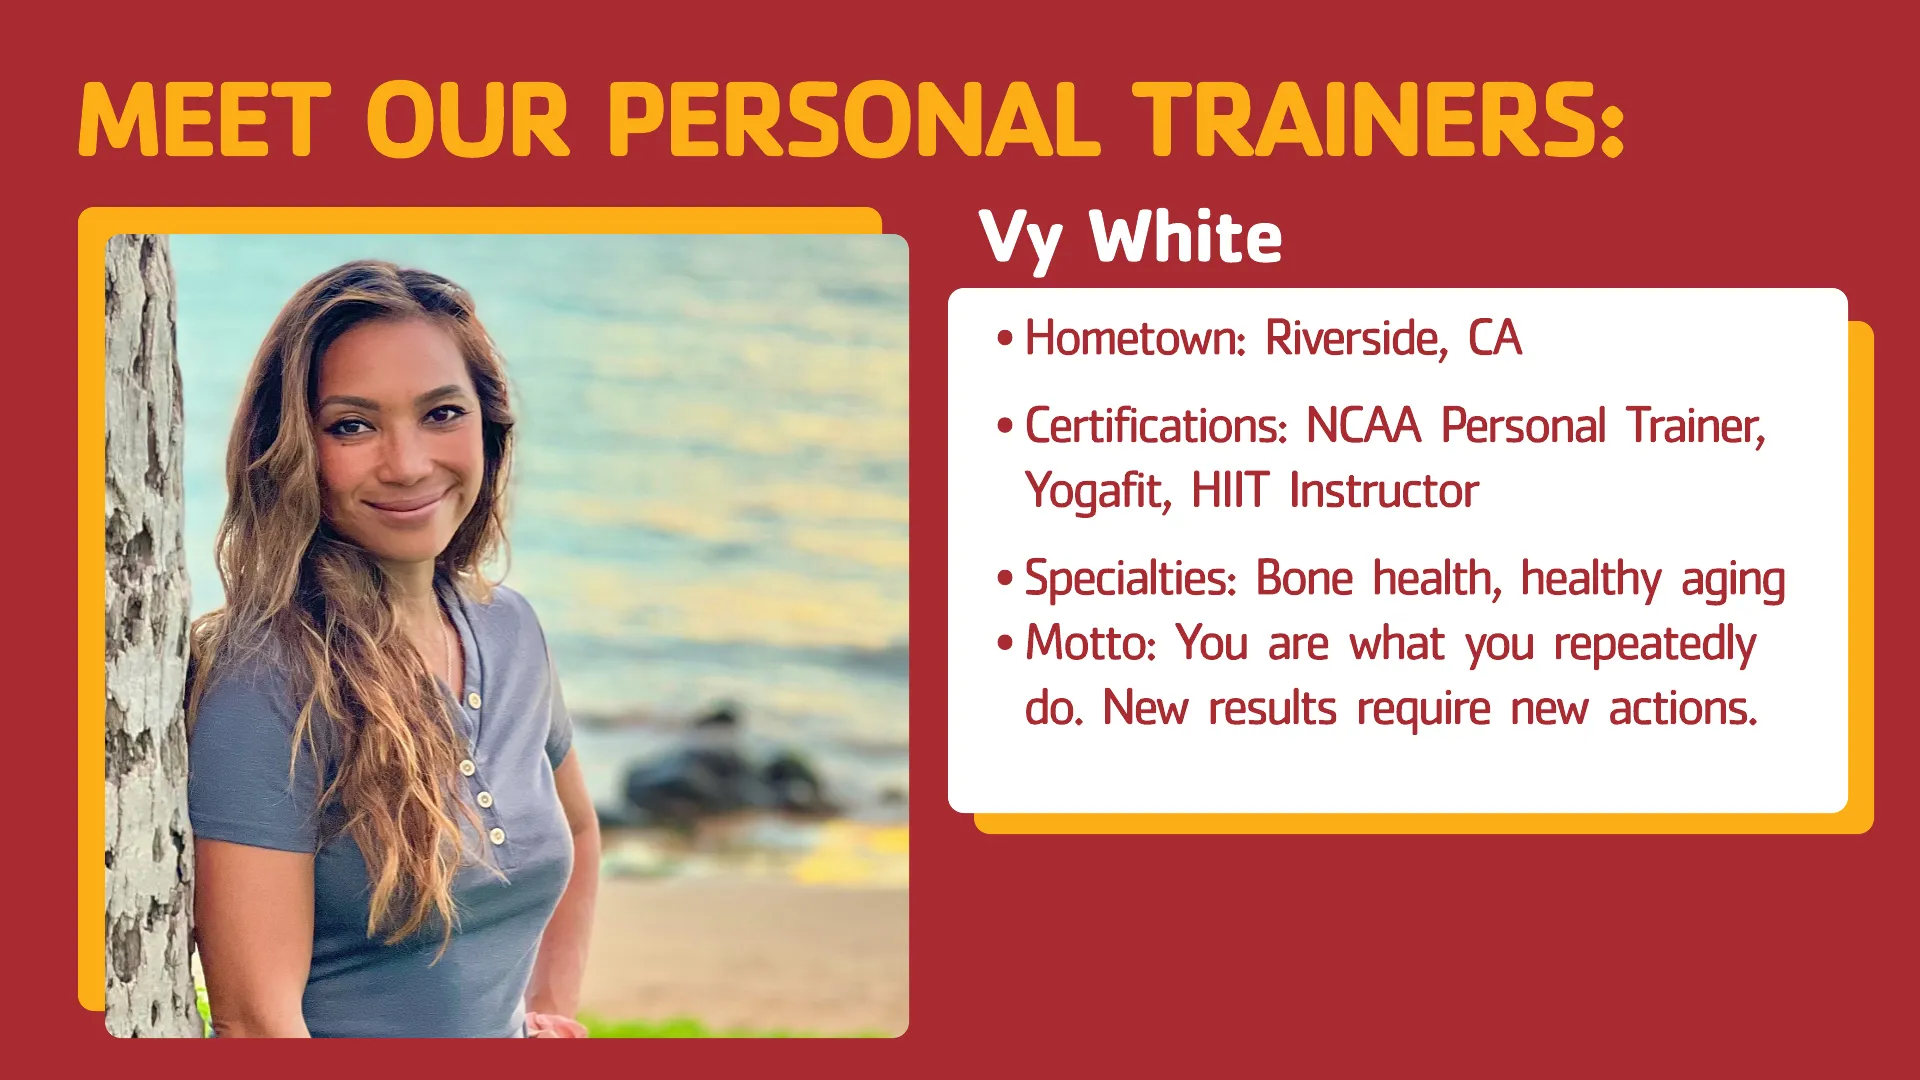 Vy White Personal Trainer Denver YMCA